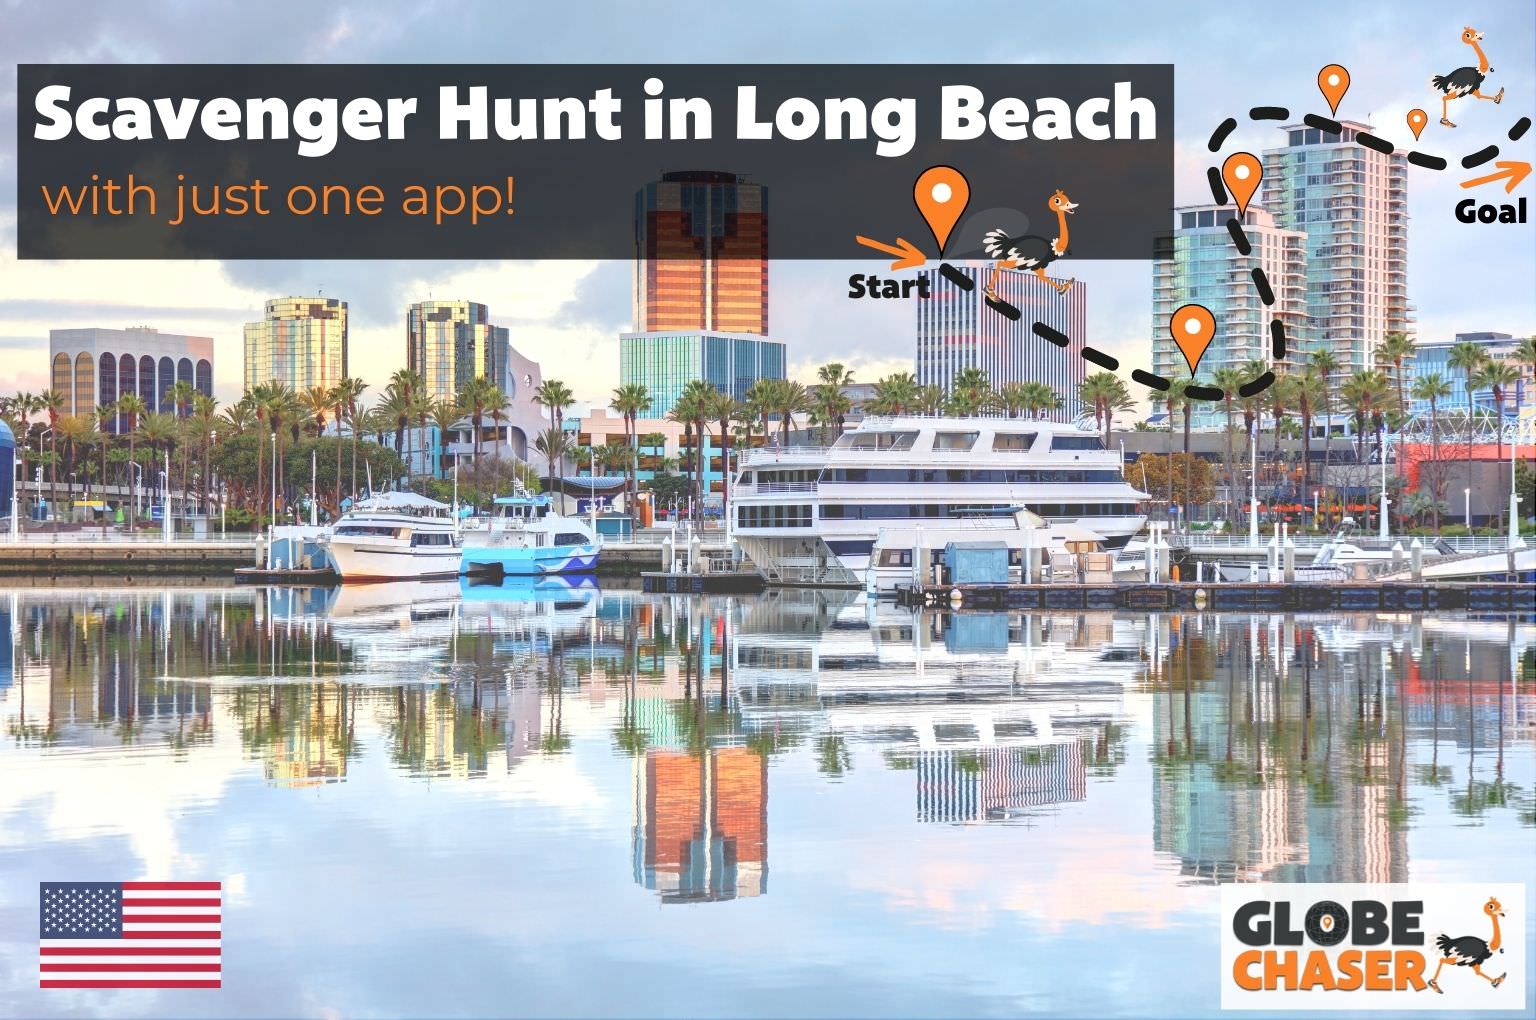 Scavenger Hunt in Long Beach, USA - Family Activities with the Globe Chaser App for Outdoor Fun